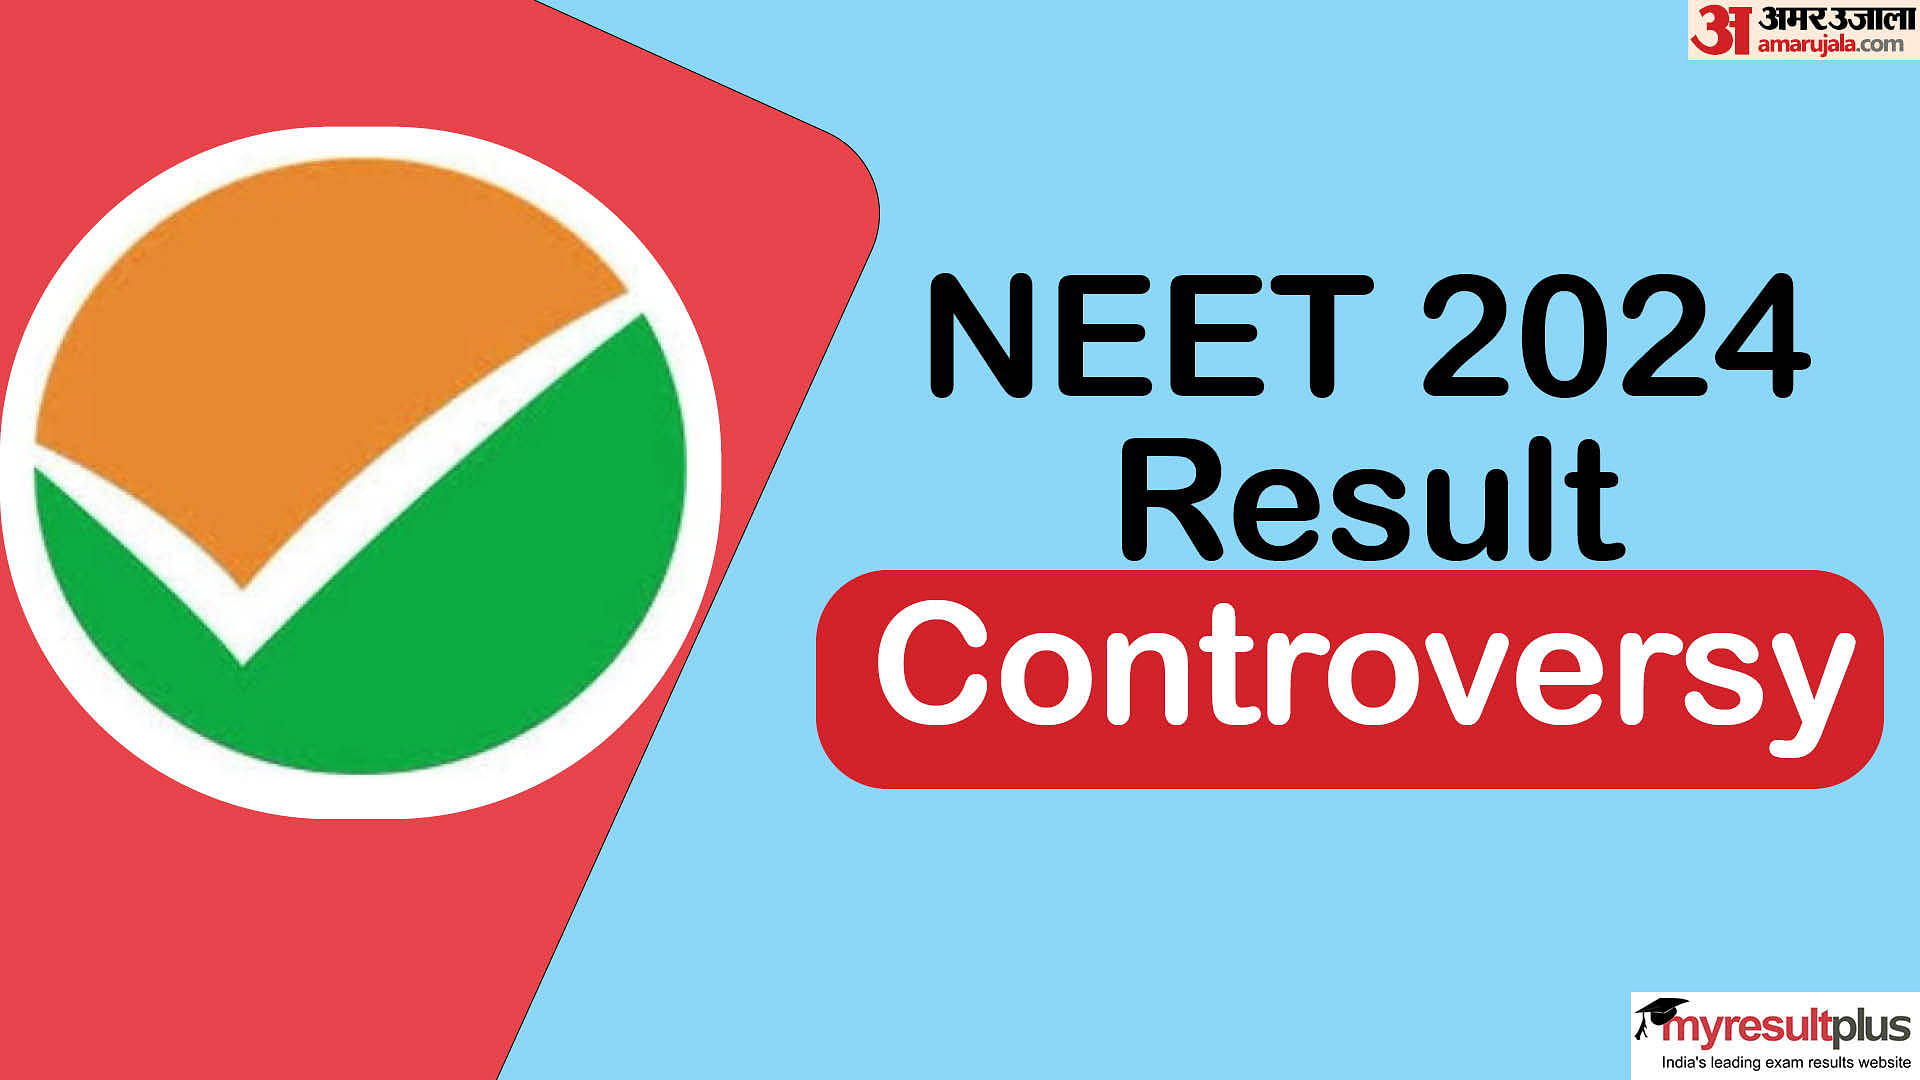 NEET Controversy: Supreme Court's decision on NEET Result 2024, Refuses to halt counselling, Read details here